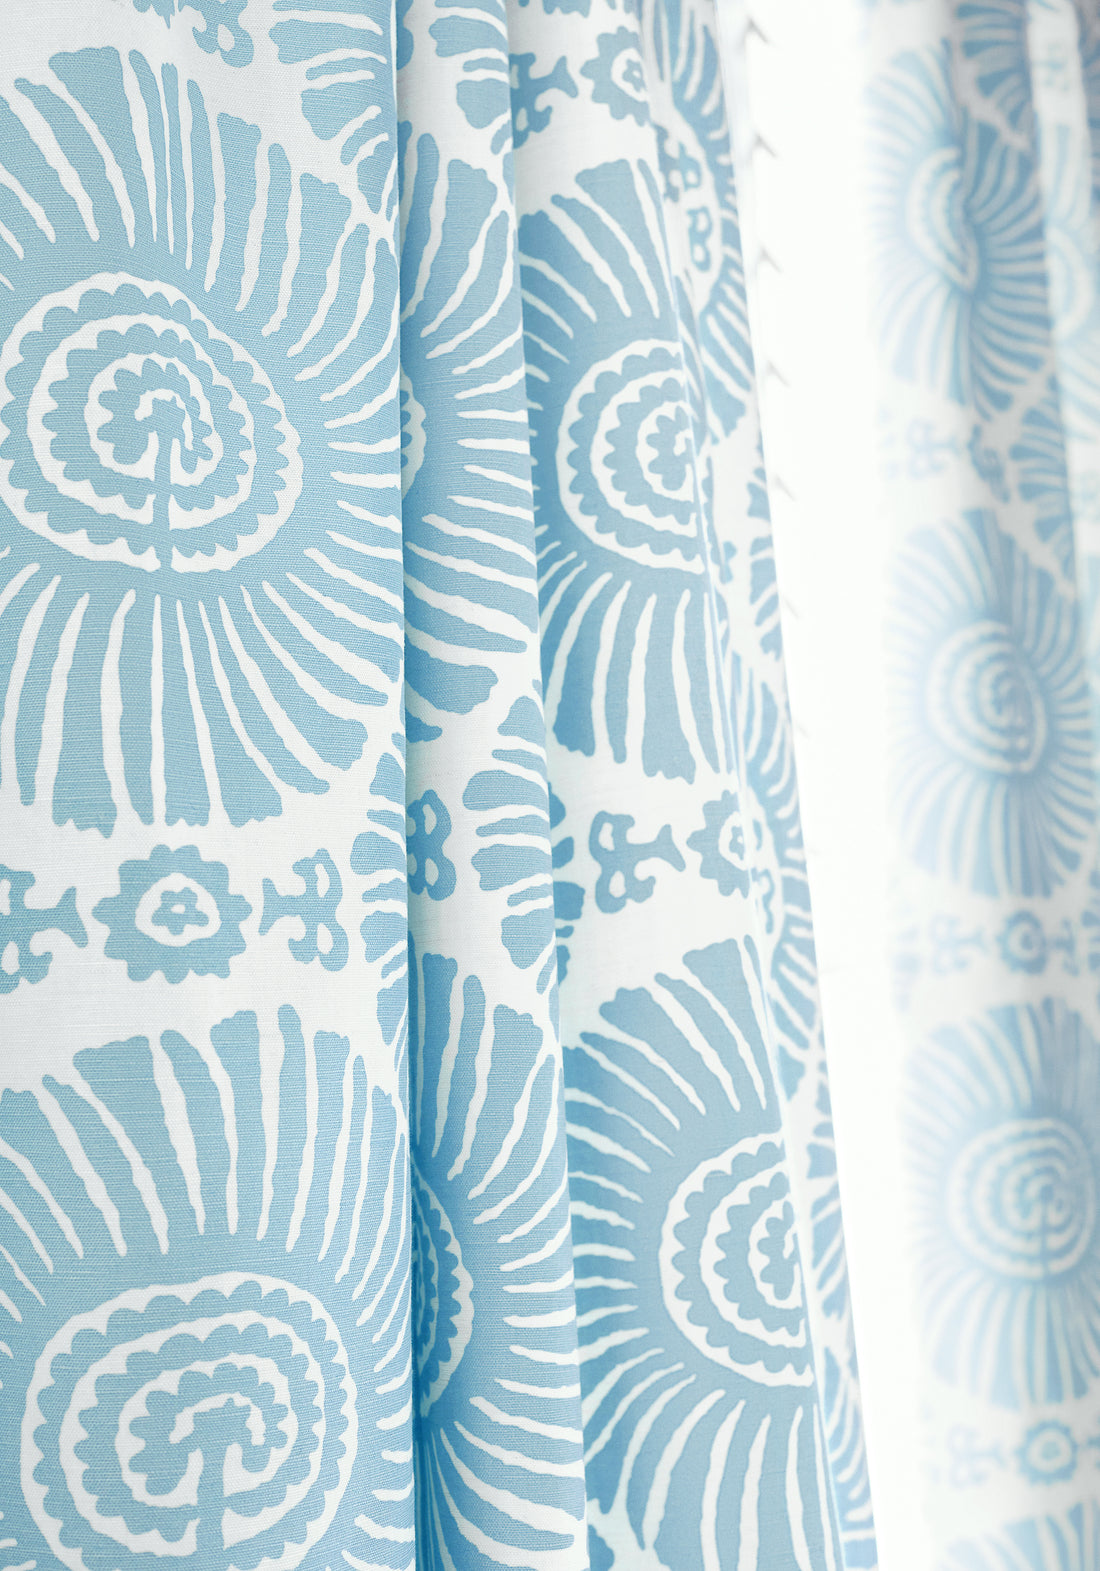 Solis printed fabric in spa blue color - pattern number F910084 - by Thibaut in the Tropics collection